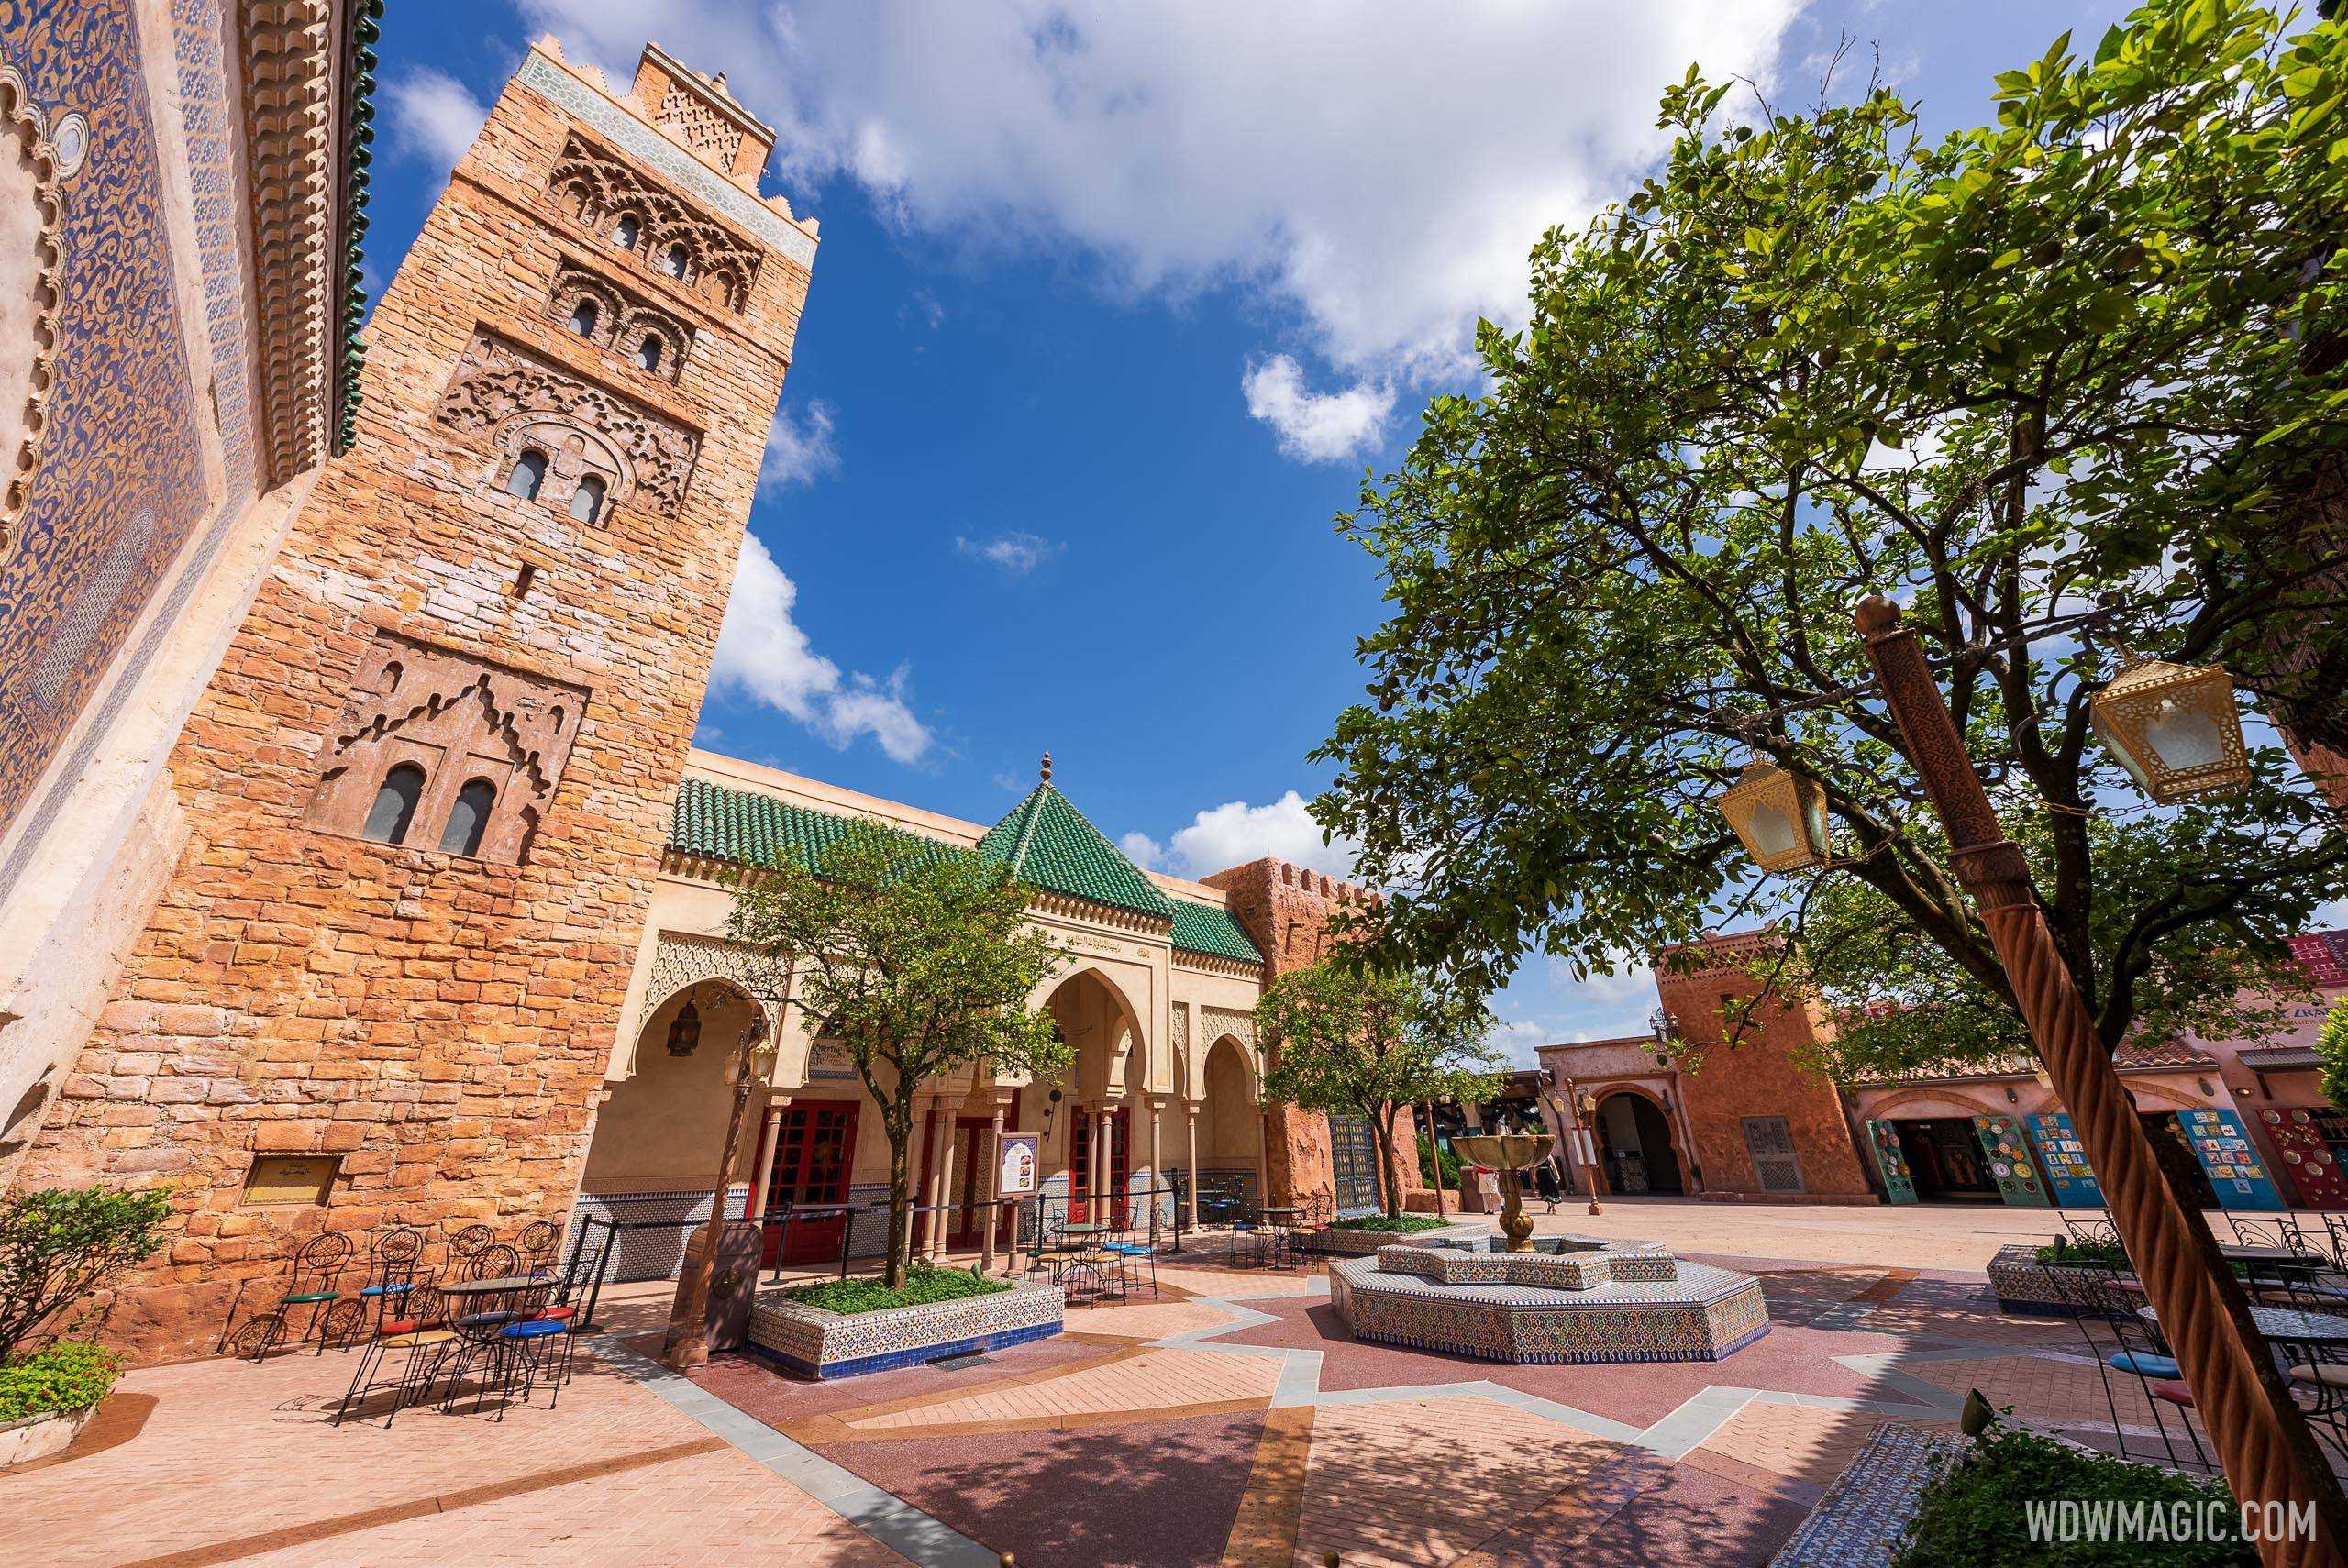 EPCOT'S Morocco Pavilion reopens the Tangierine Café and Restaurant Marrakesh